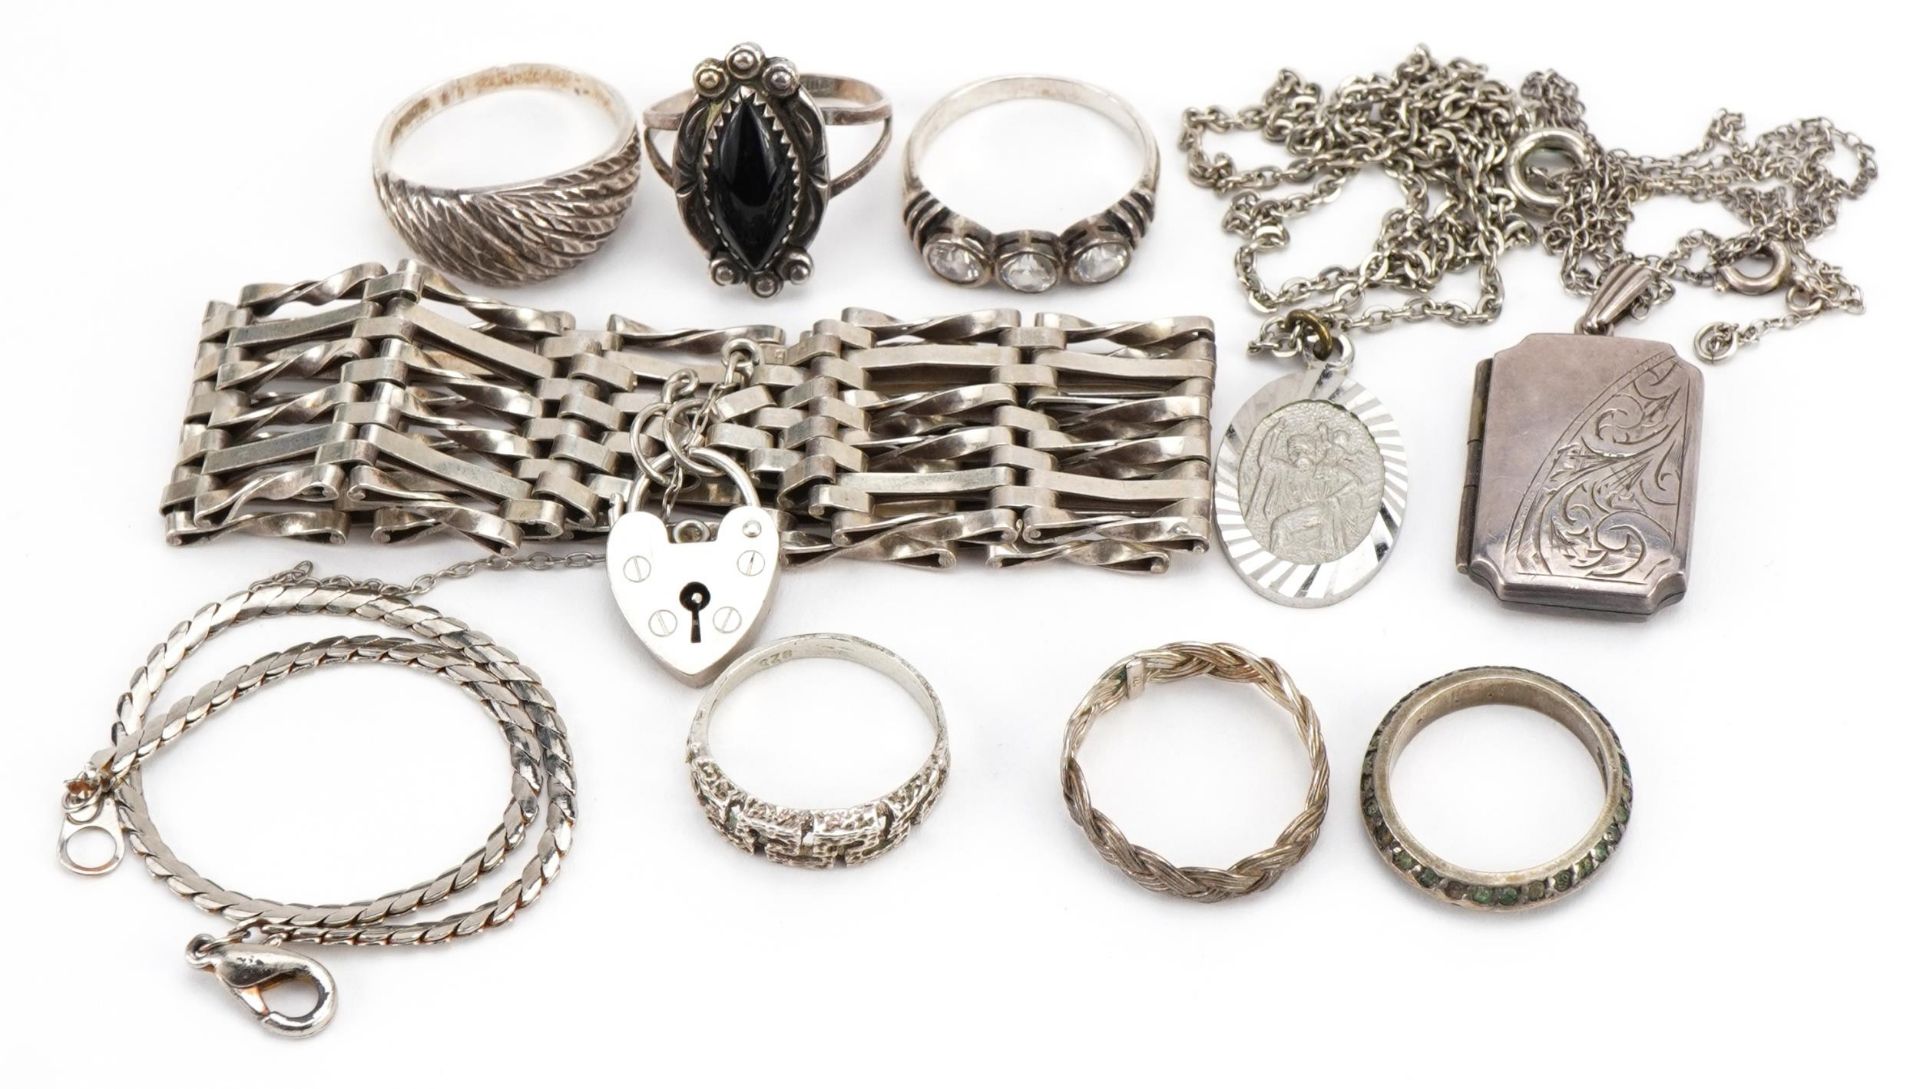 Silver and white metal jewellery including rings, gate link bracelet and rectangular locket with